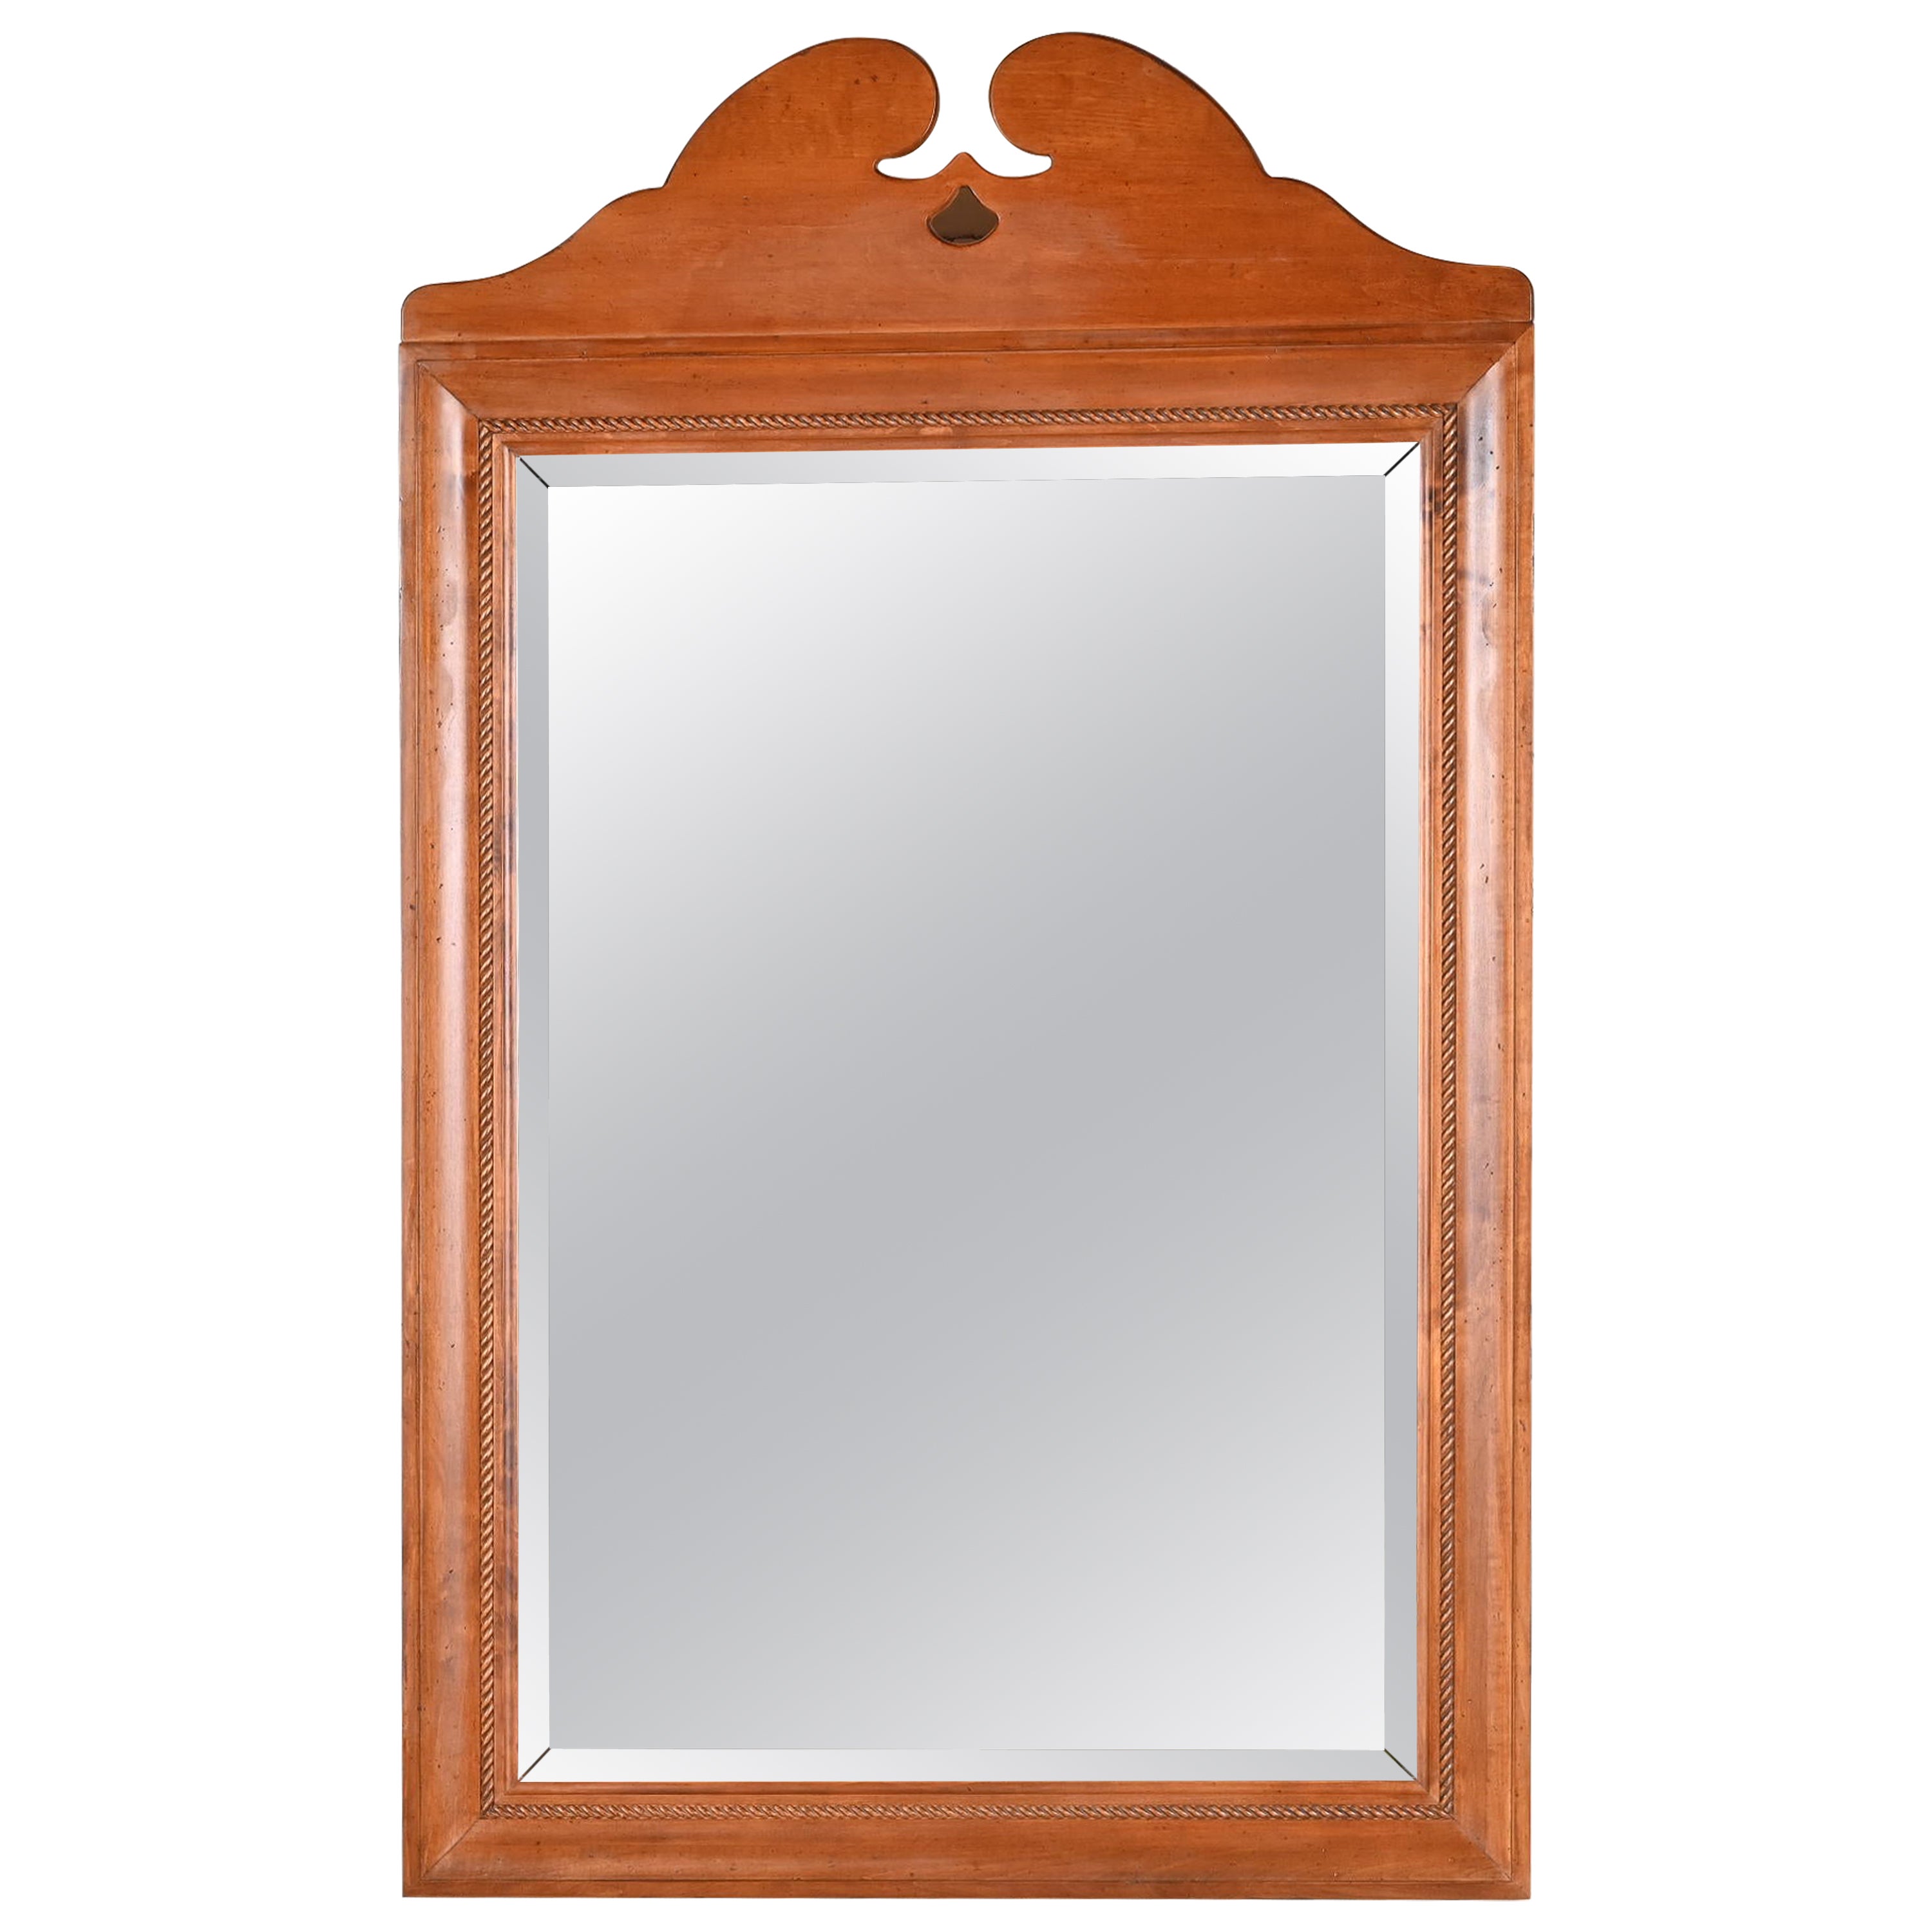 Early American Carved Maple Framed Beveled Wall Mirror For Sale